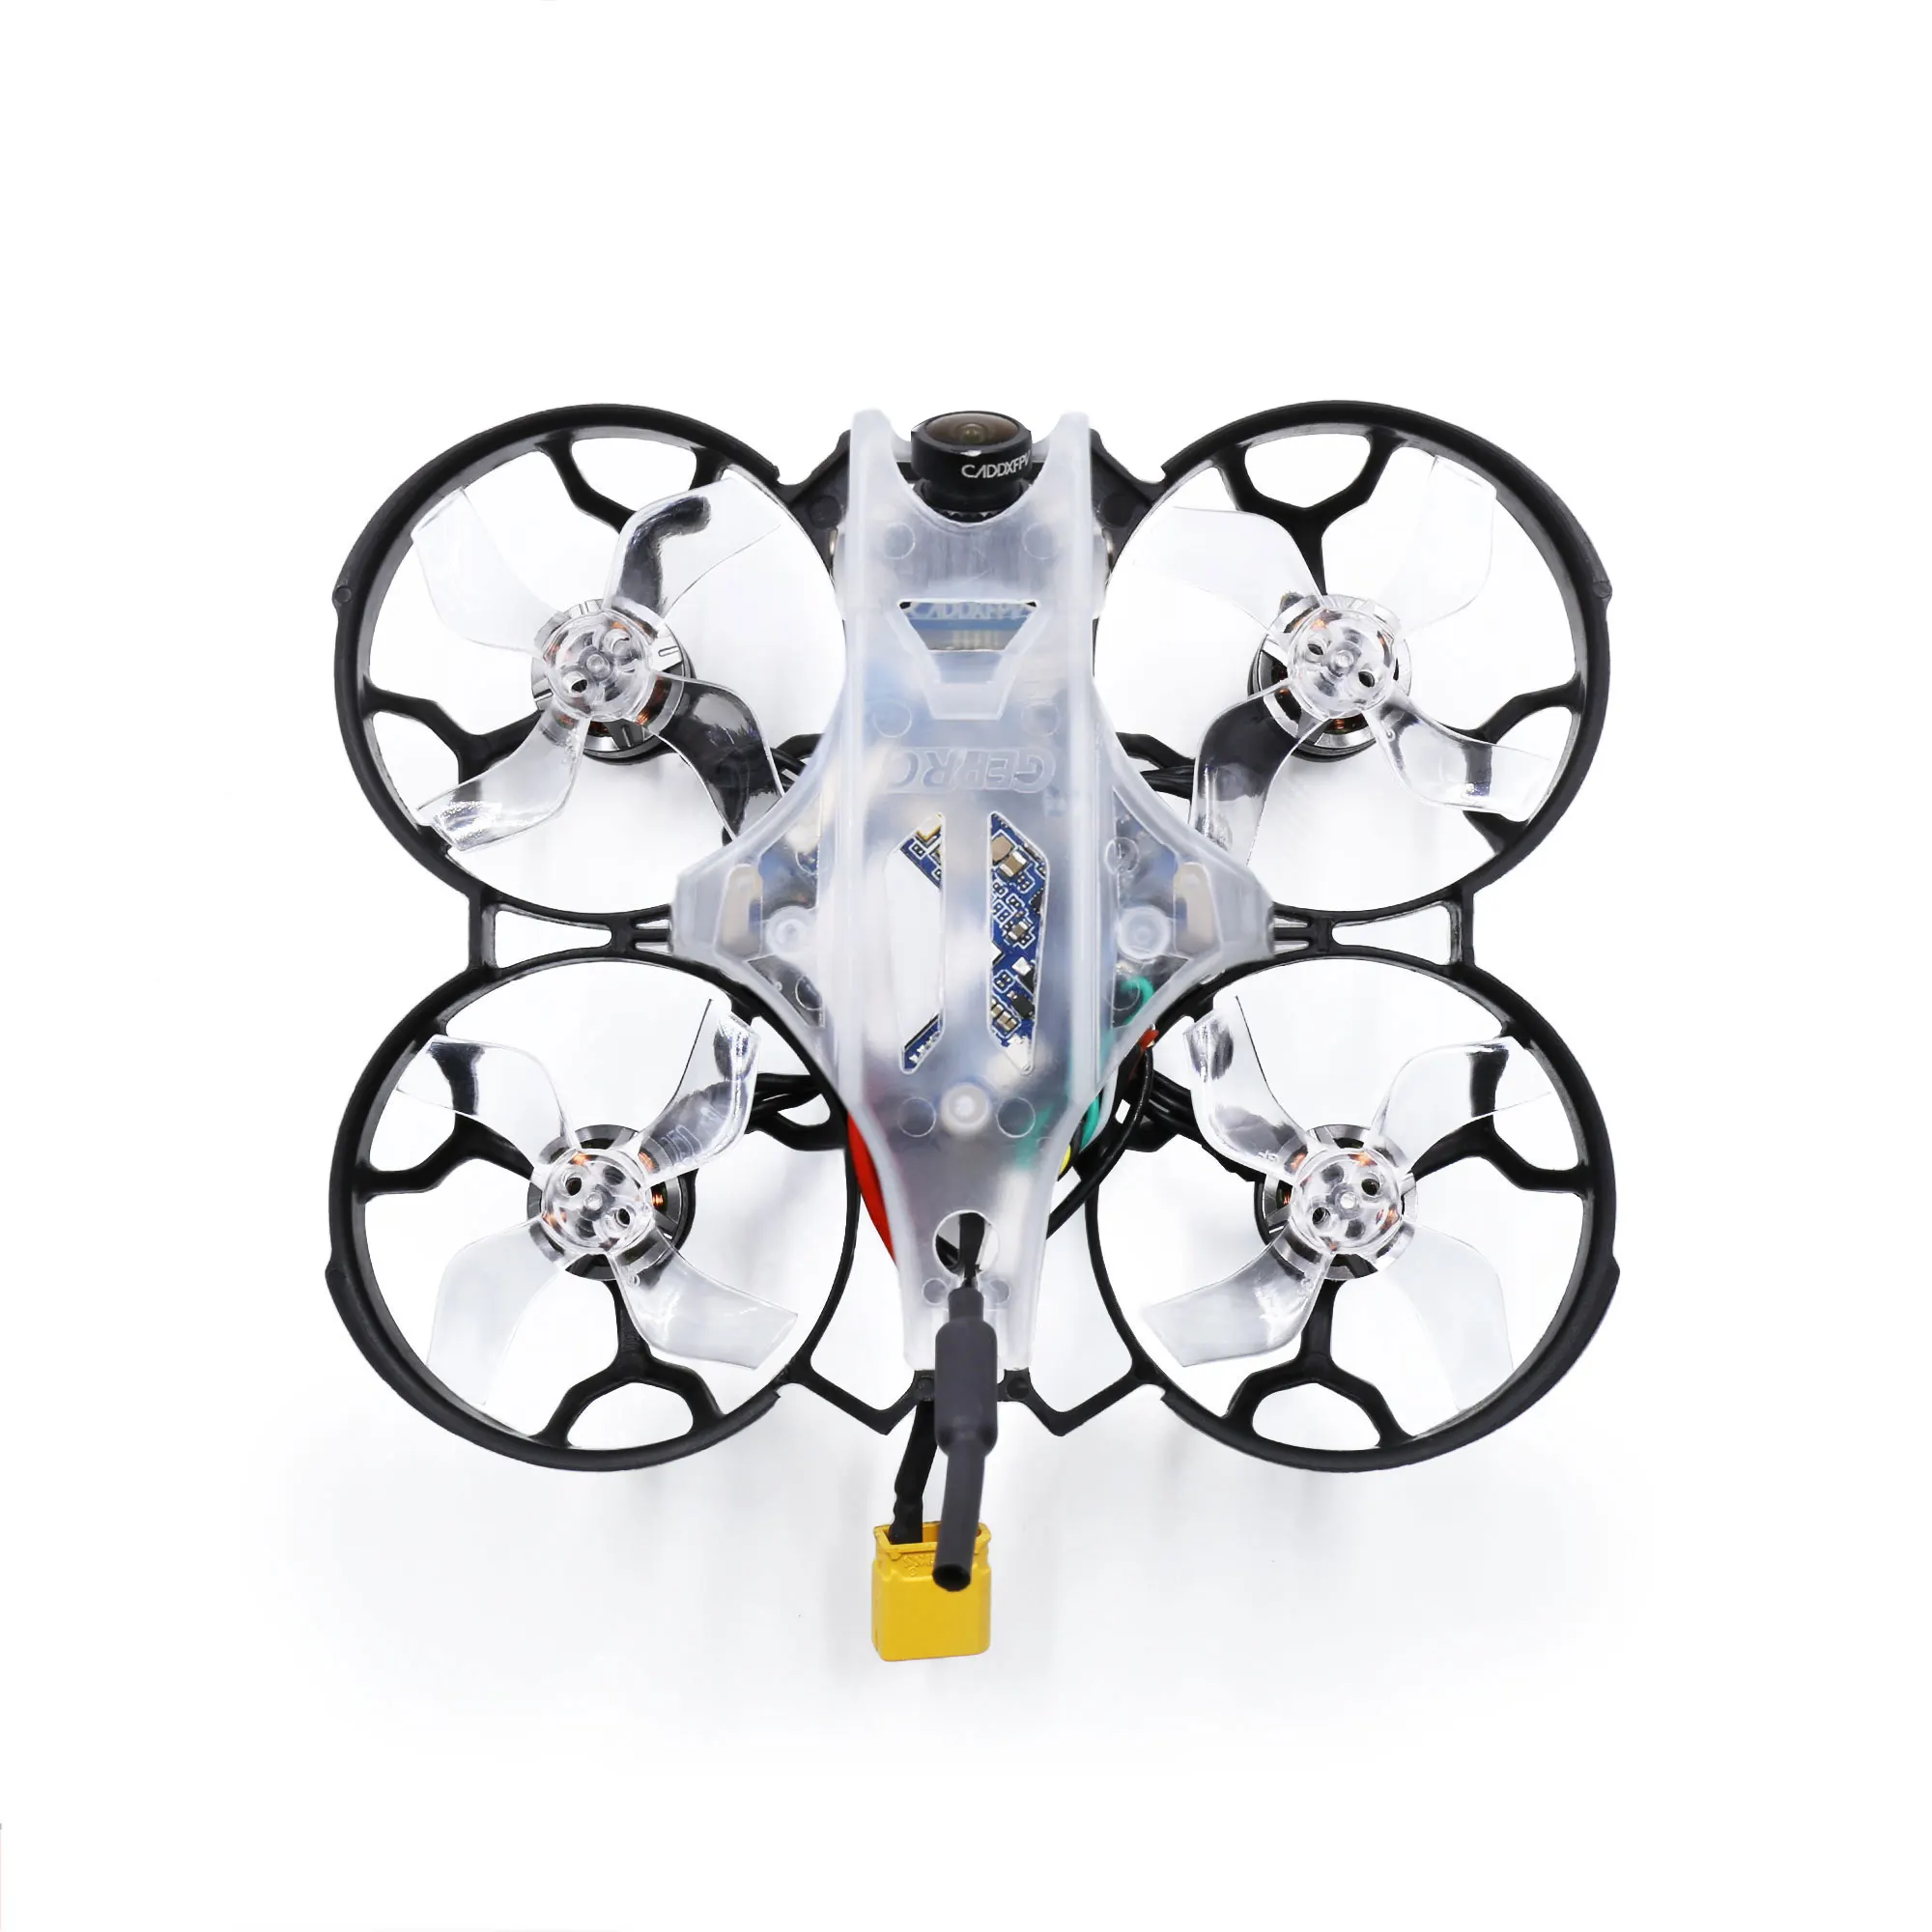 GEPRC Thinking P16 4K GEP-12A-F4 AIO 5.8G 200mW Caddx Loris 4K GR1103 8000KV 3S 79mm 1.6inch FPV Tinywhoop Cinewhoop Drone 5